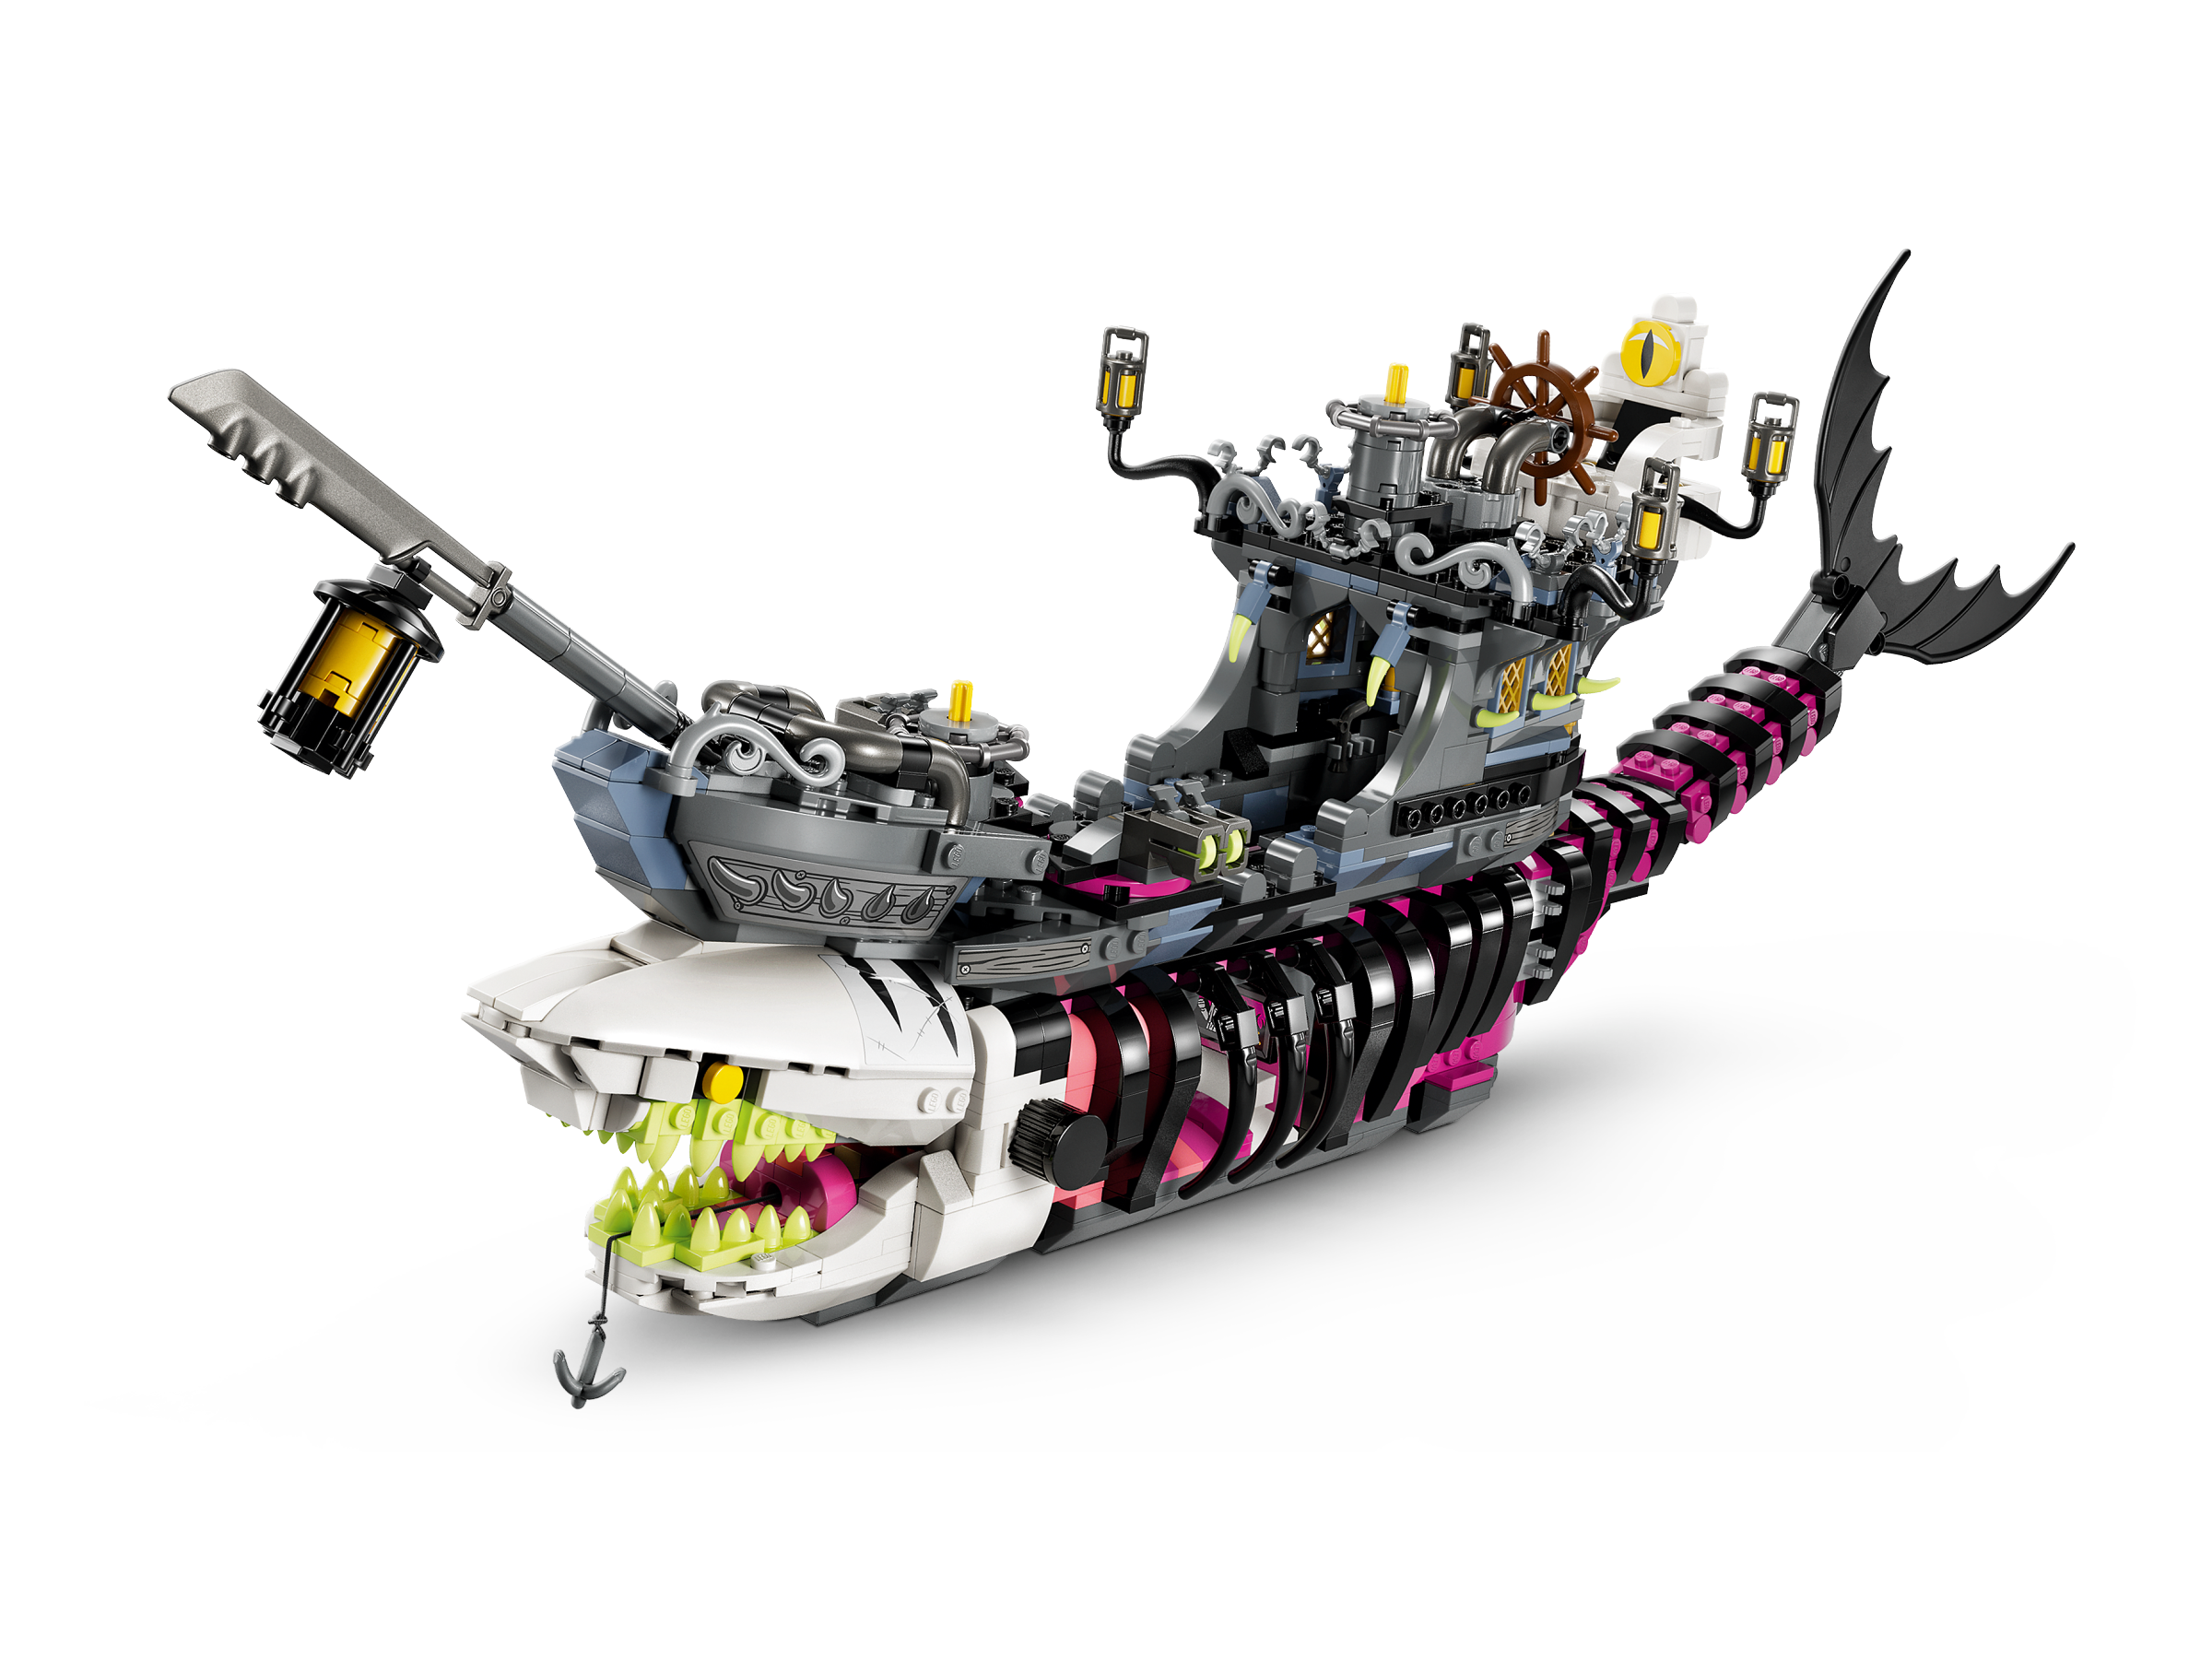 Nightmare Shark Ship 71469 | LEGO® DREAMZzz™ | Buy online at the 